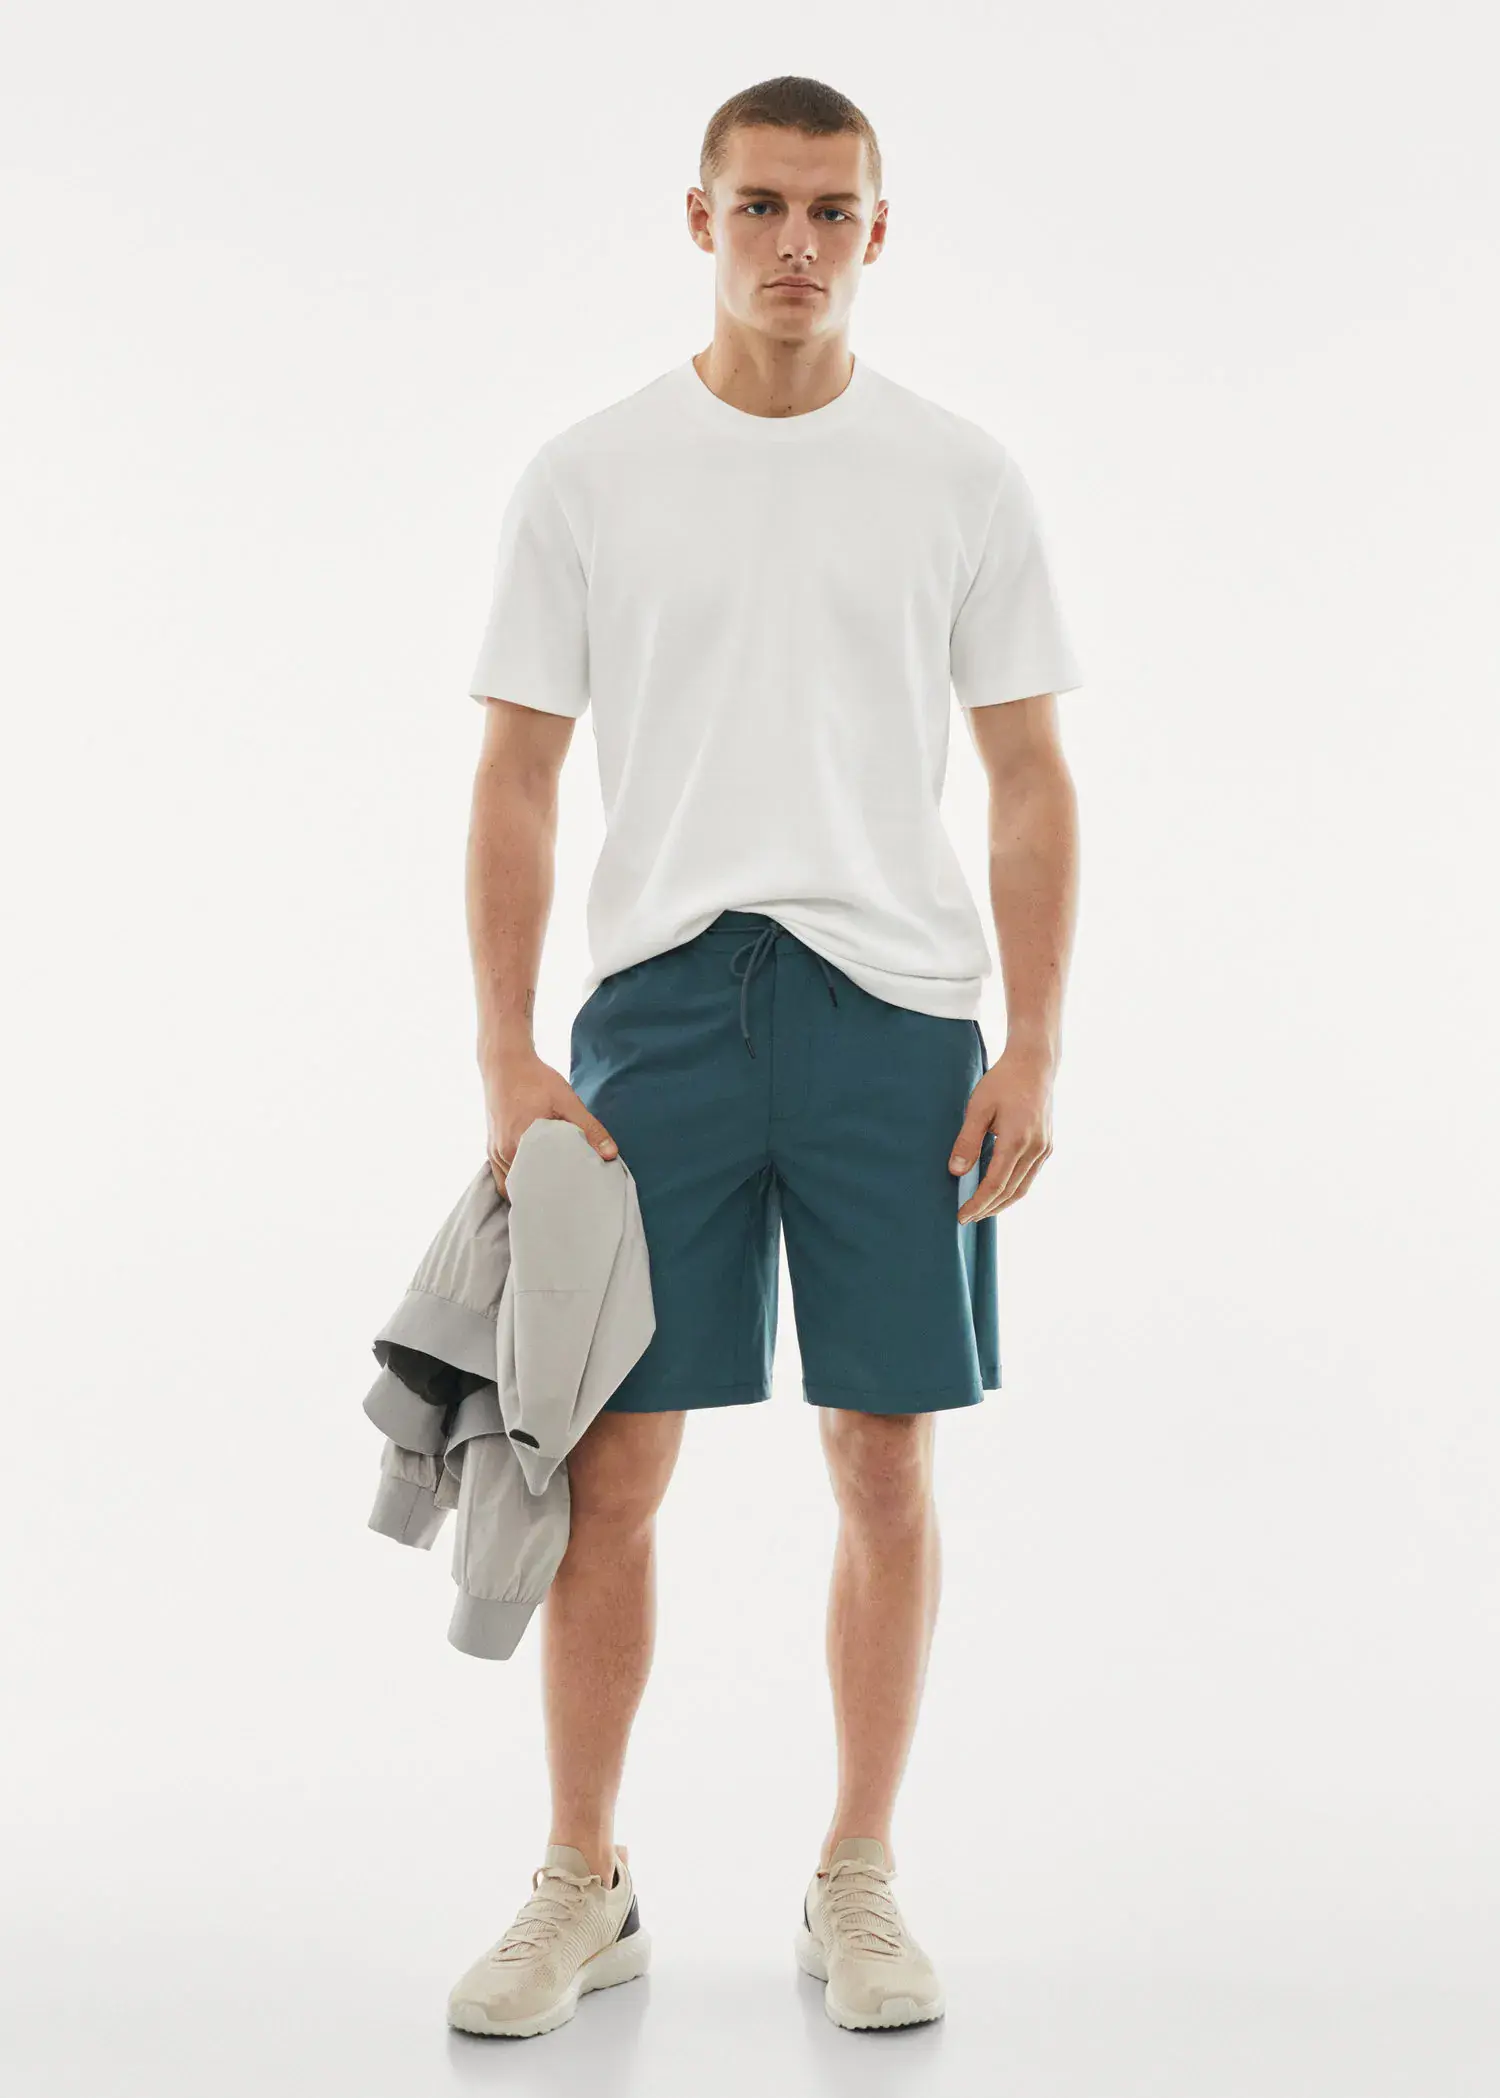 Mango Breathable cotton t-shirt. a young man wearing a white shirt and blue shorts. 